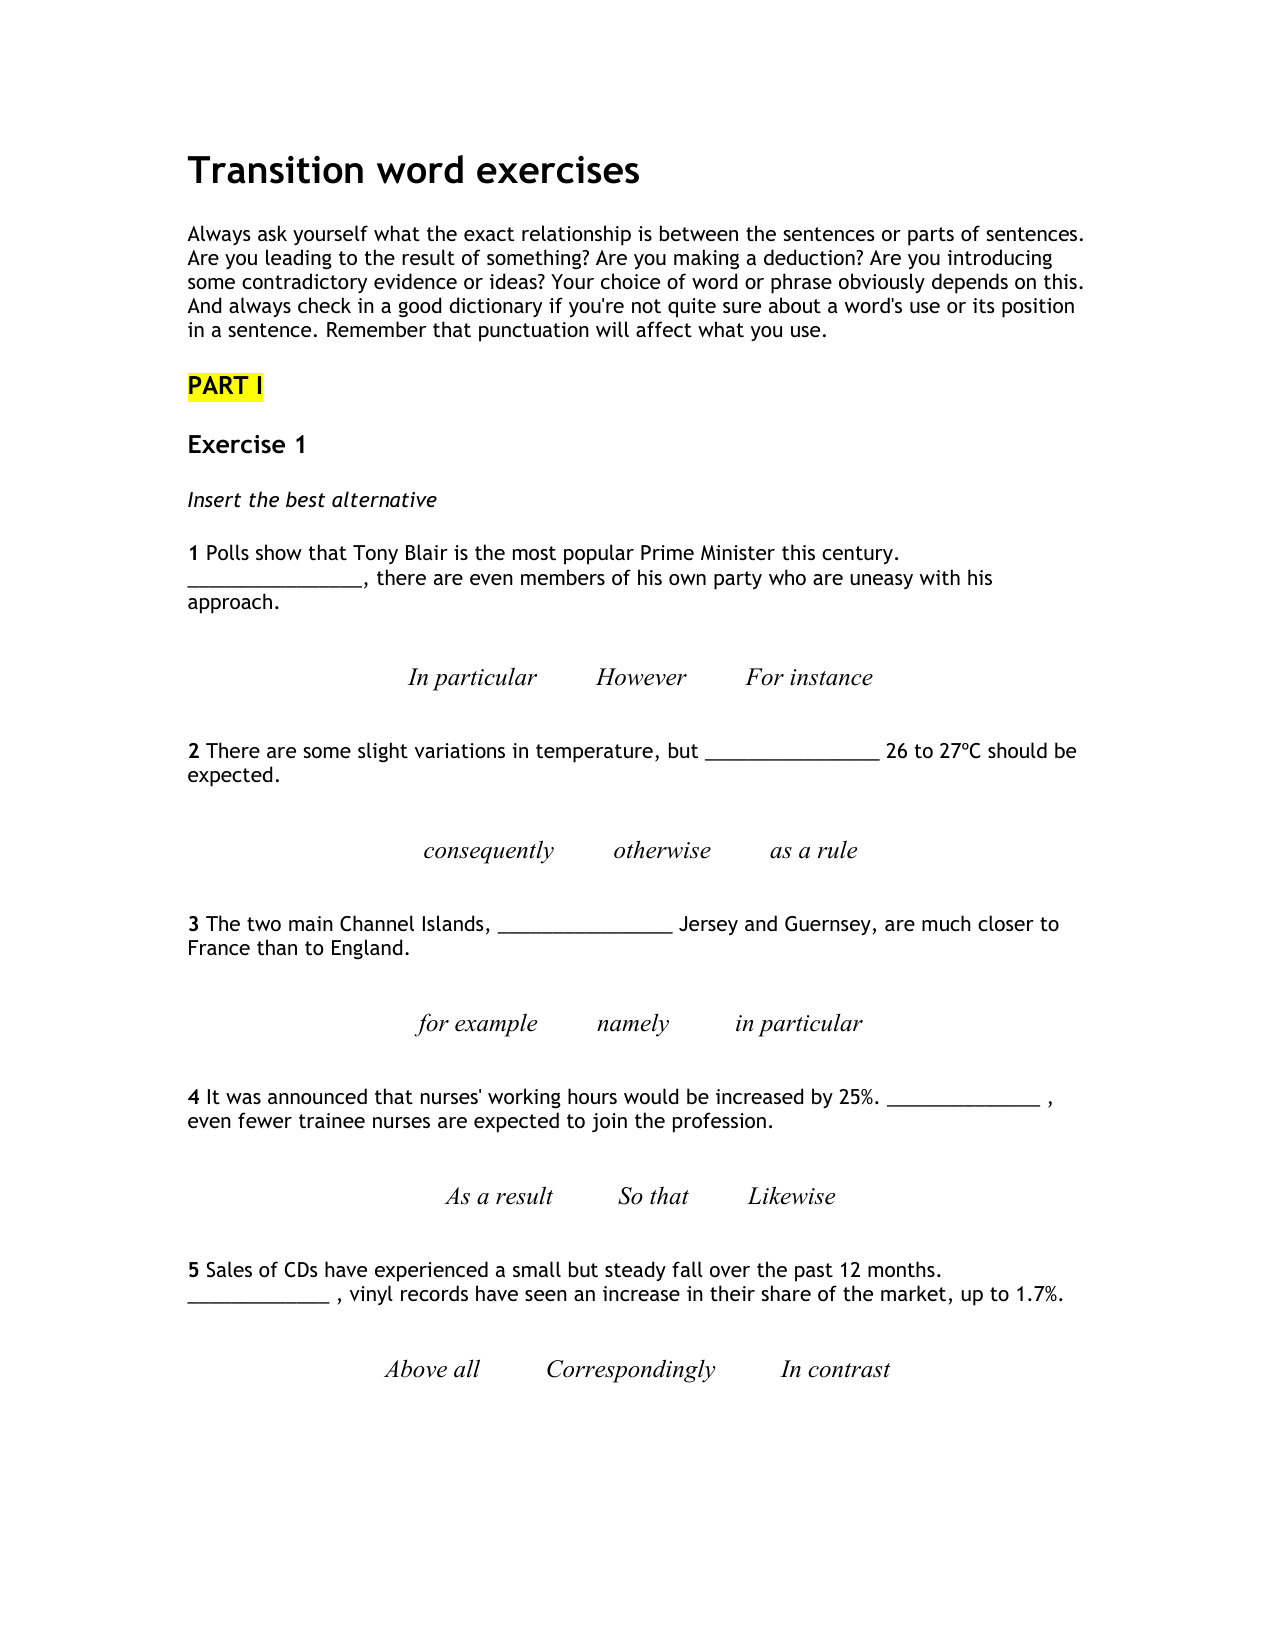 transition-word-exercises-1-doc